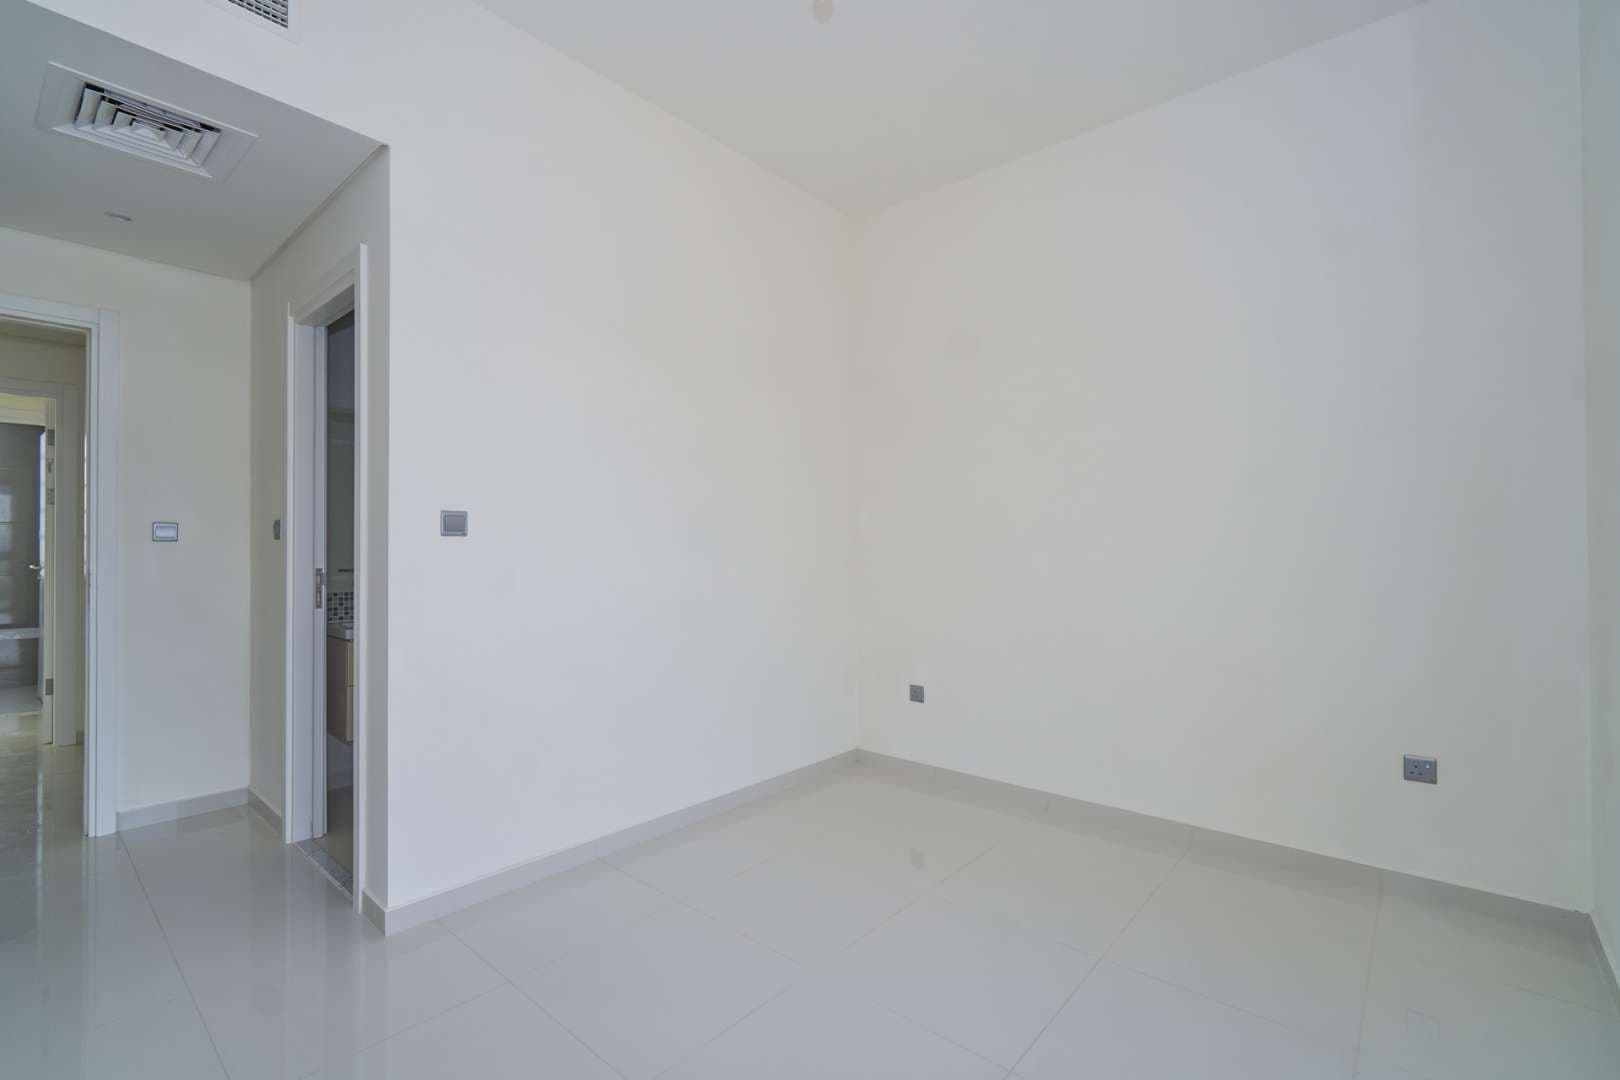 3 Bedroom Townhouse For Rent Aster Lp08510 Bc9817584a74e80.jpg